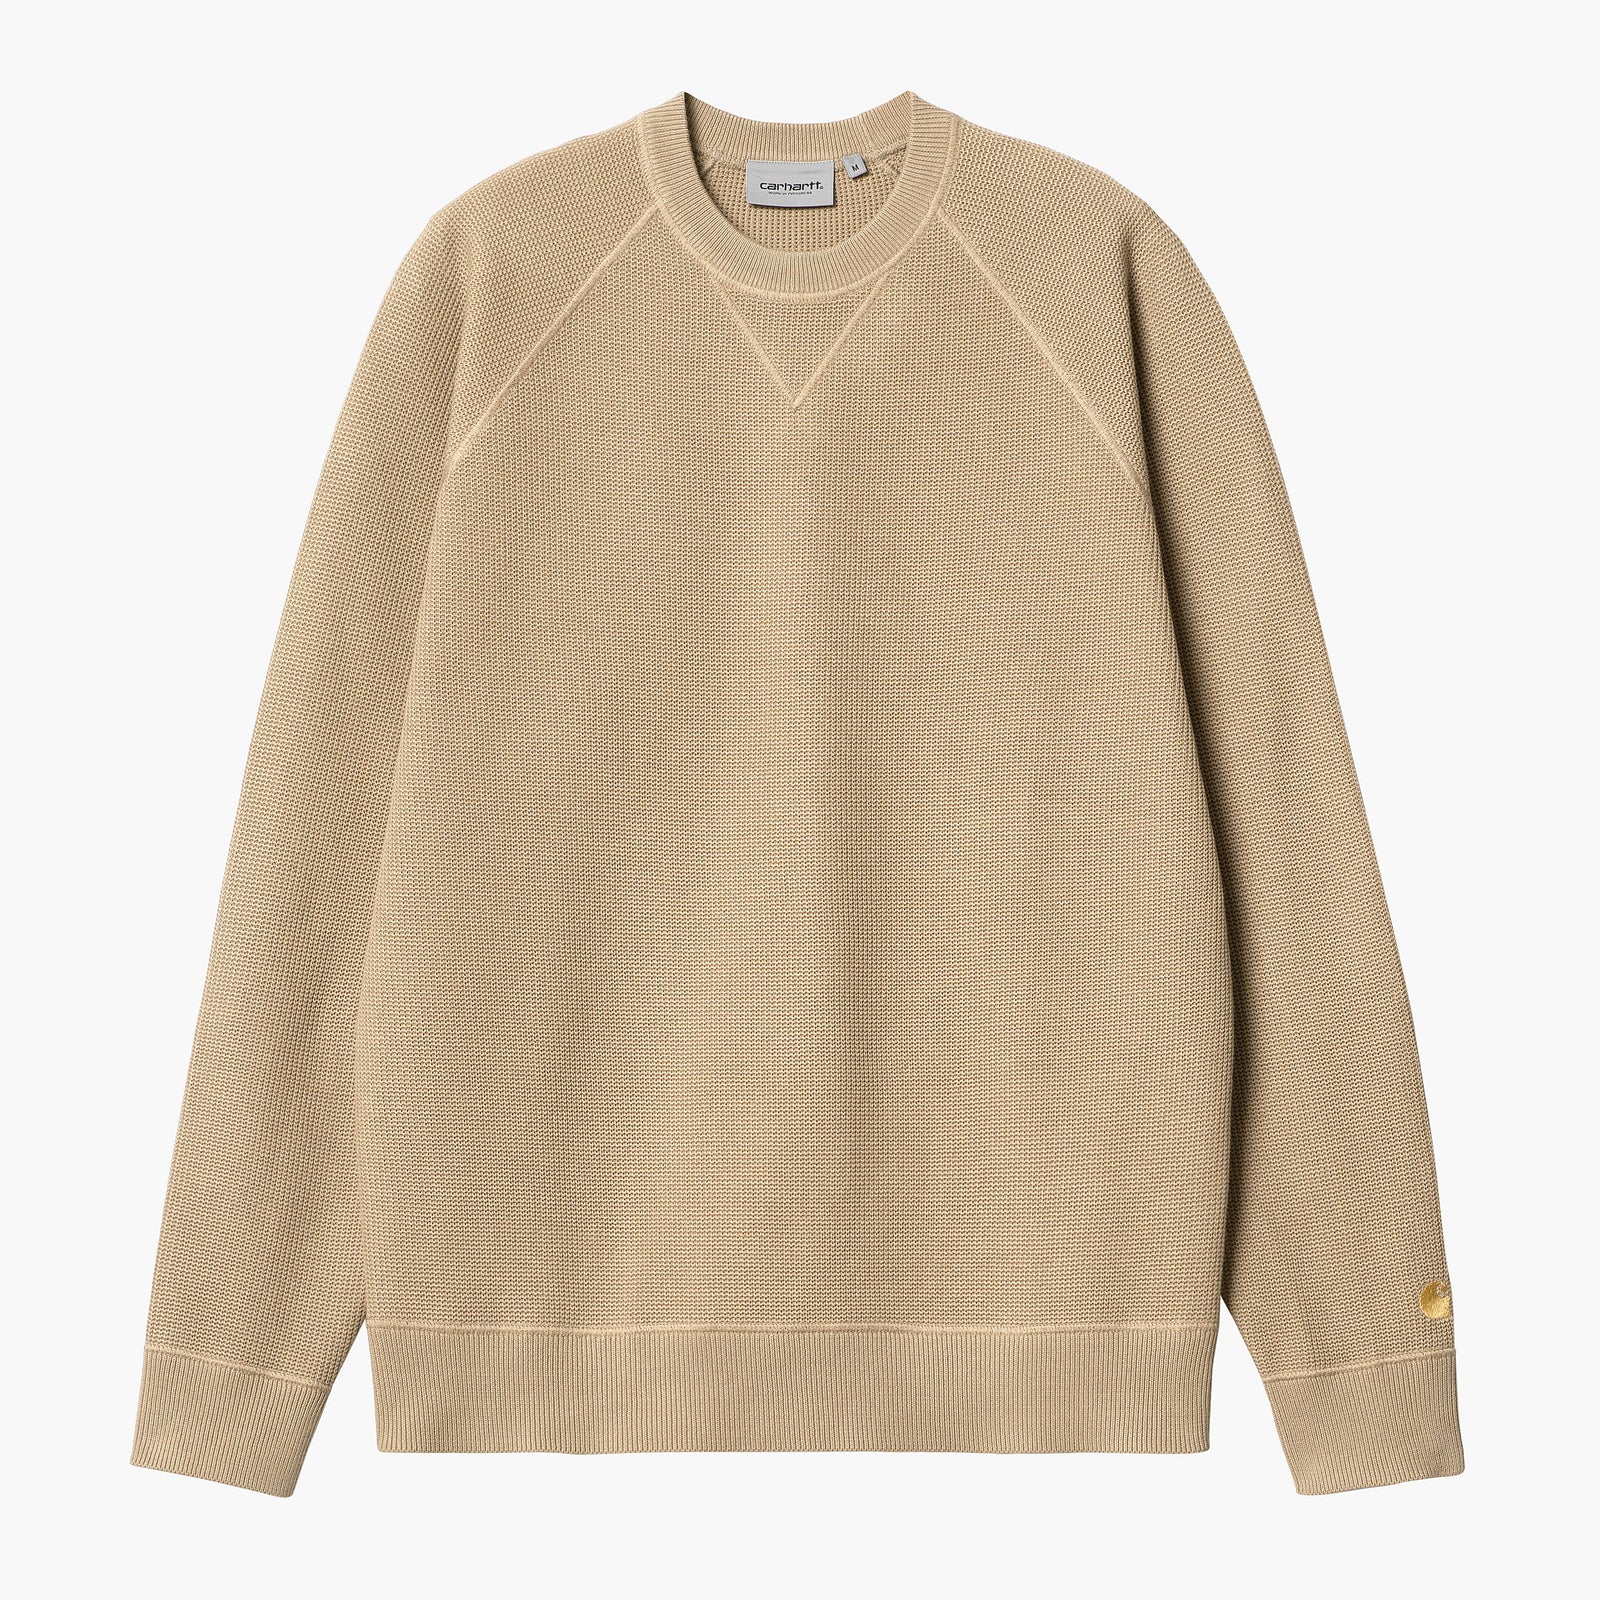 Chase Sweater Sable / Gold